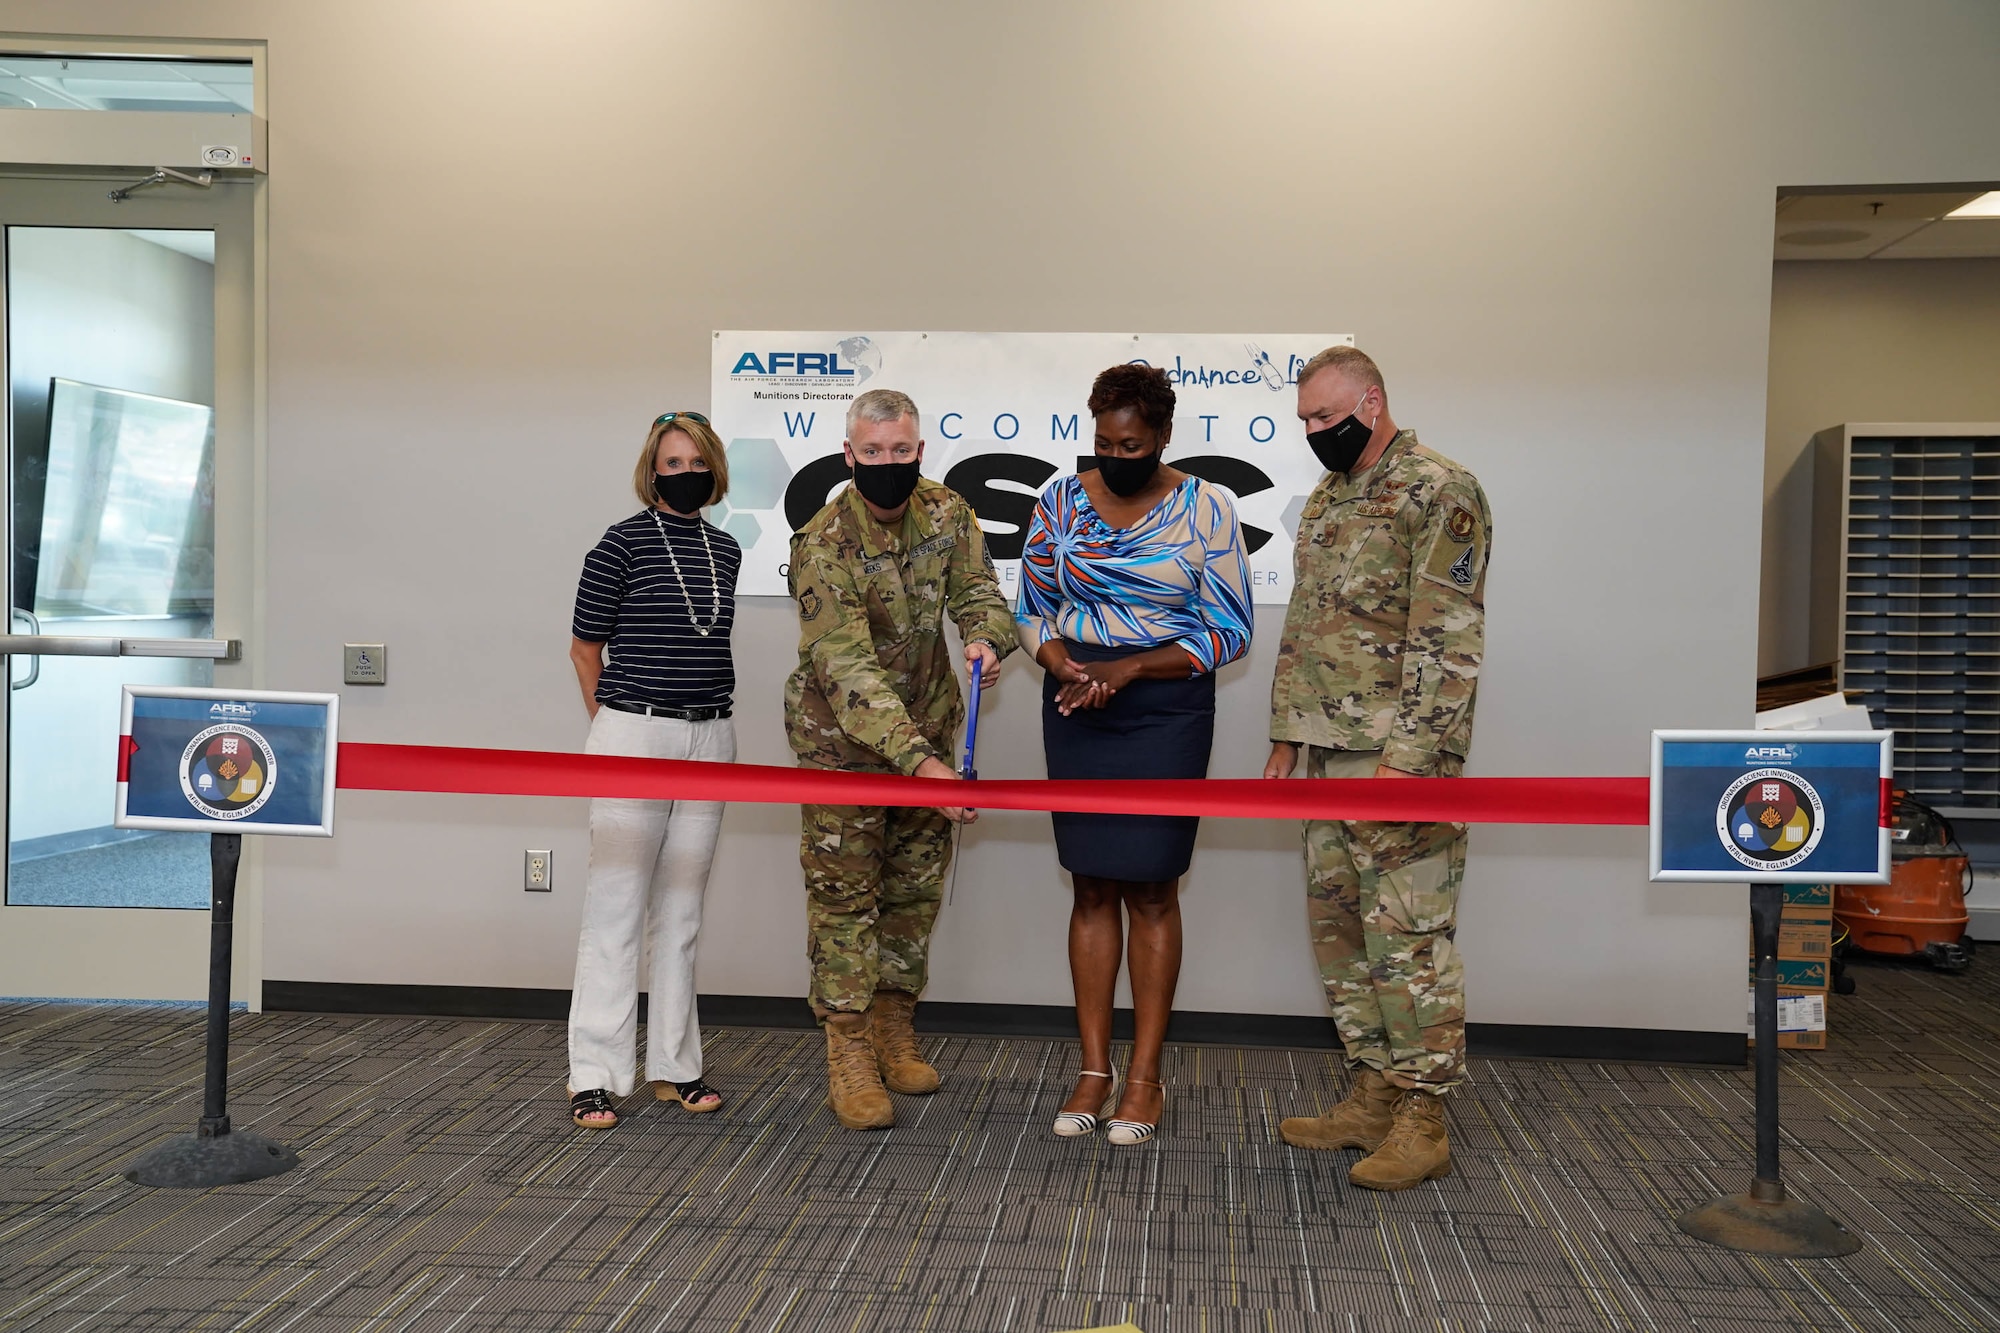 AFRL Munitions Directorate Commander, Col. W. Tony Meeks cuts the ceremonial ribbon for the new Ordnance Science Innovation Center on Eglin AFB, Fla. He is flanked on the left by Integration and Operations Division Chief, Jaime Pinto, and to the right by Ordnance Division Chief, Segrid Harris, followed by former Director, Col Garry Haase. (U.S. Air Force photo/John Leake)